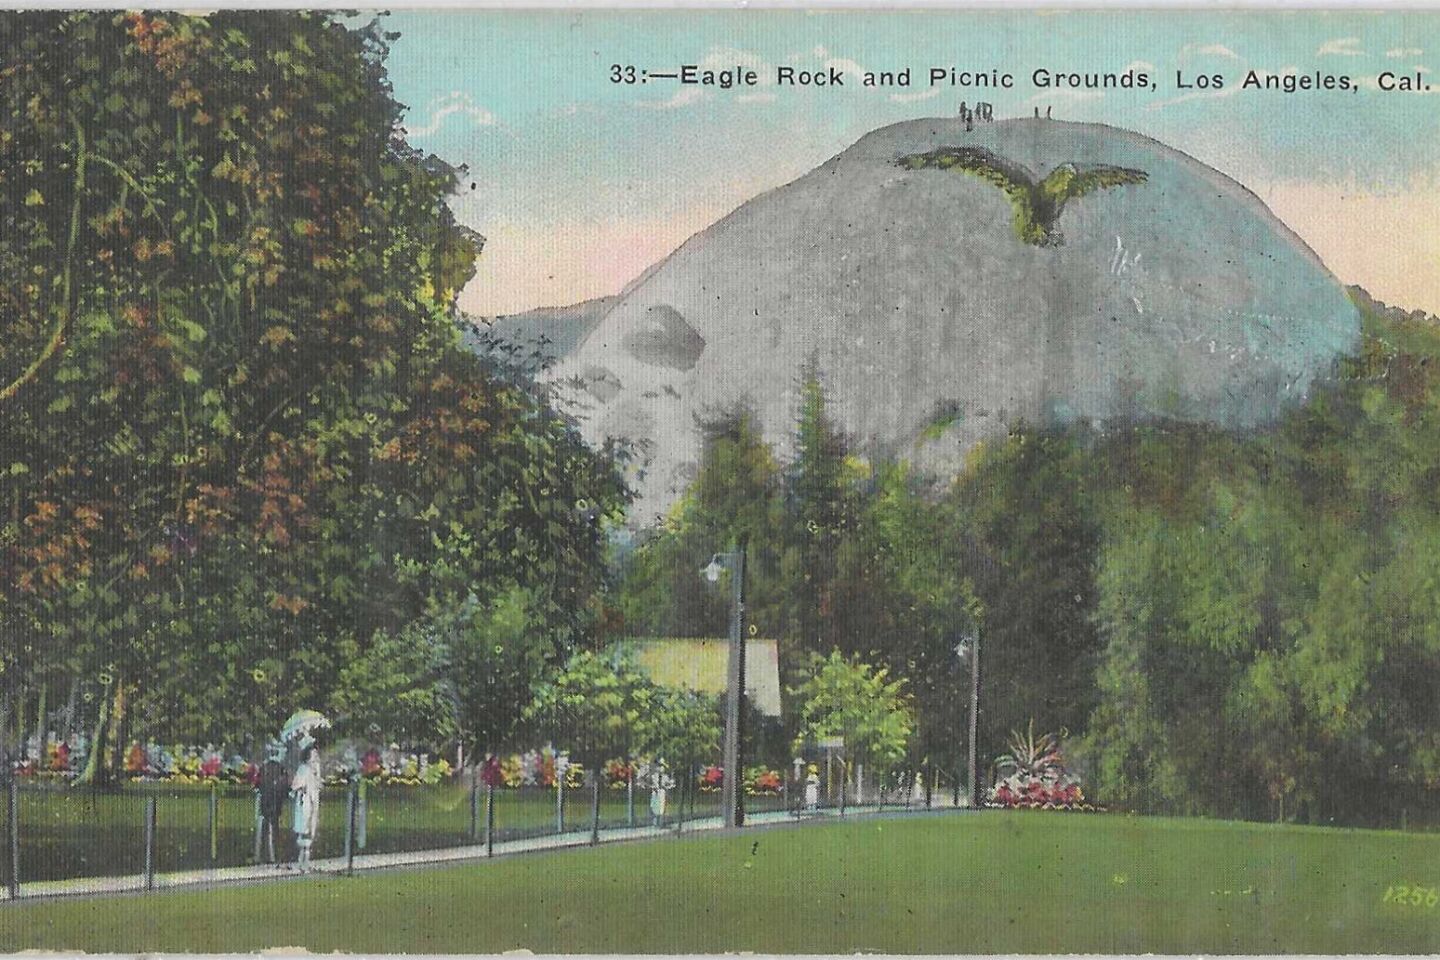 A vintage postcard depicts "Eagle Rock and Picnic Grounds, Los Angeles, Cal."